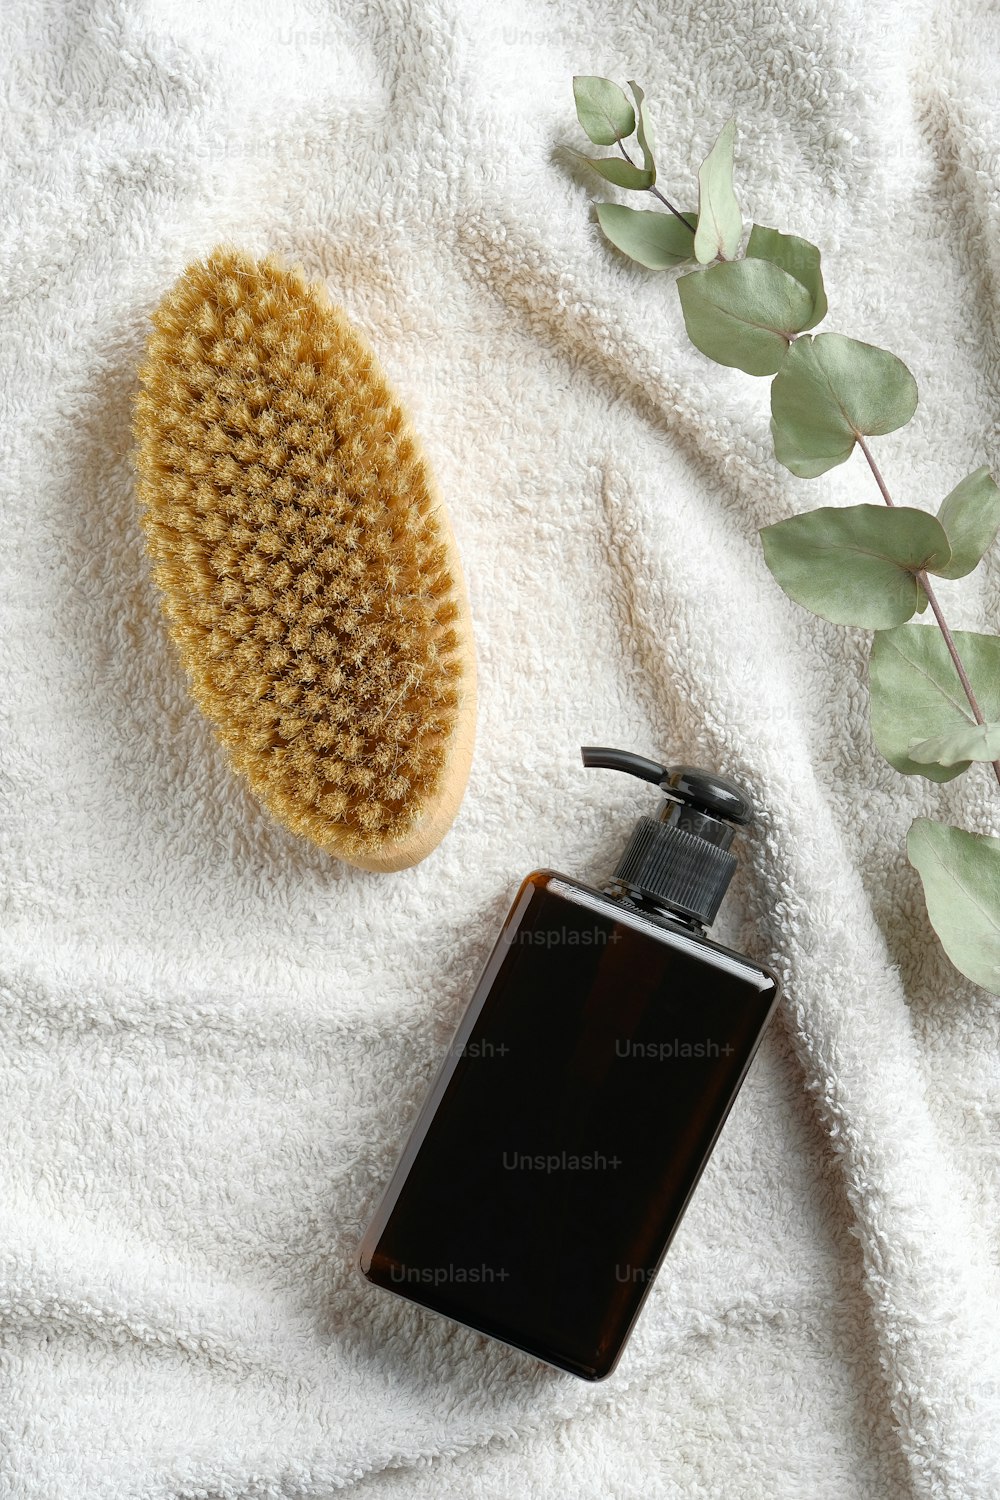 Dry brush, green glass lotion bottle and eucalyptus leaf on white towel in bathroom. SPA natural organic cosmetic products set. Body care, cellulite treatment concept.